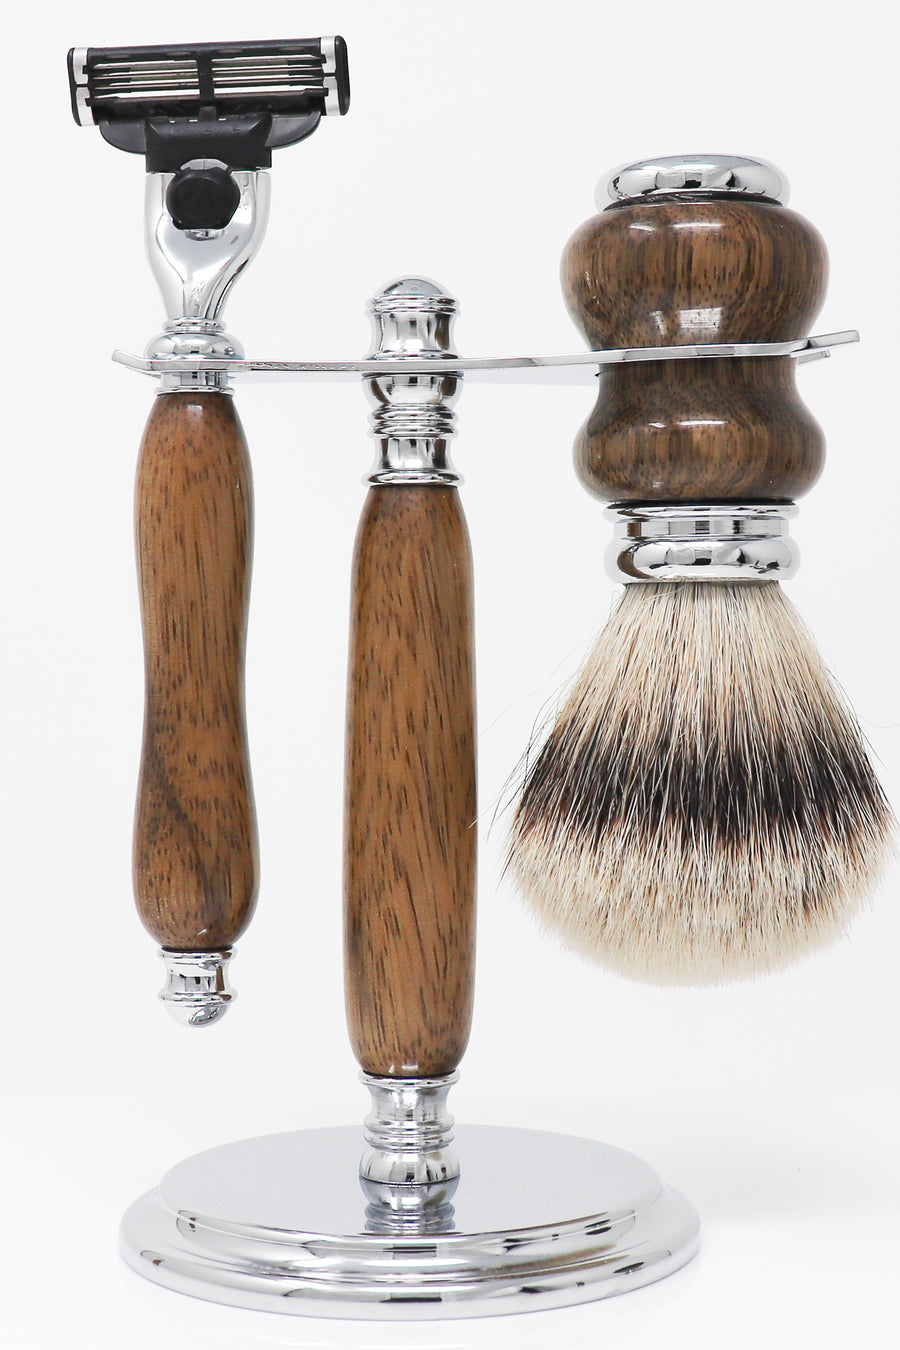 Hand-turned Premium Razor Set with Badger Shave Brush in African Black Limba